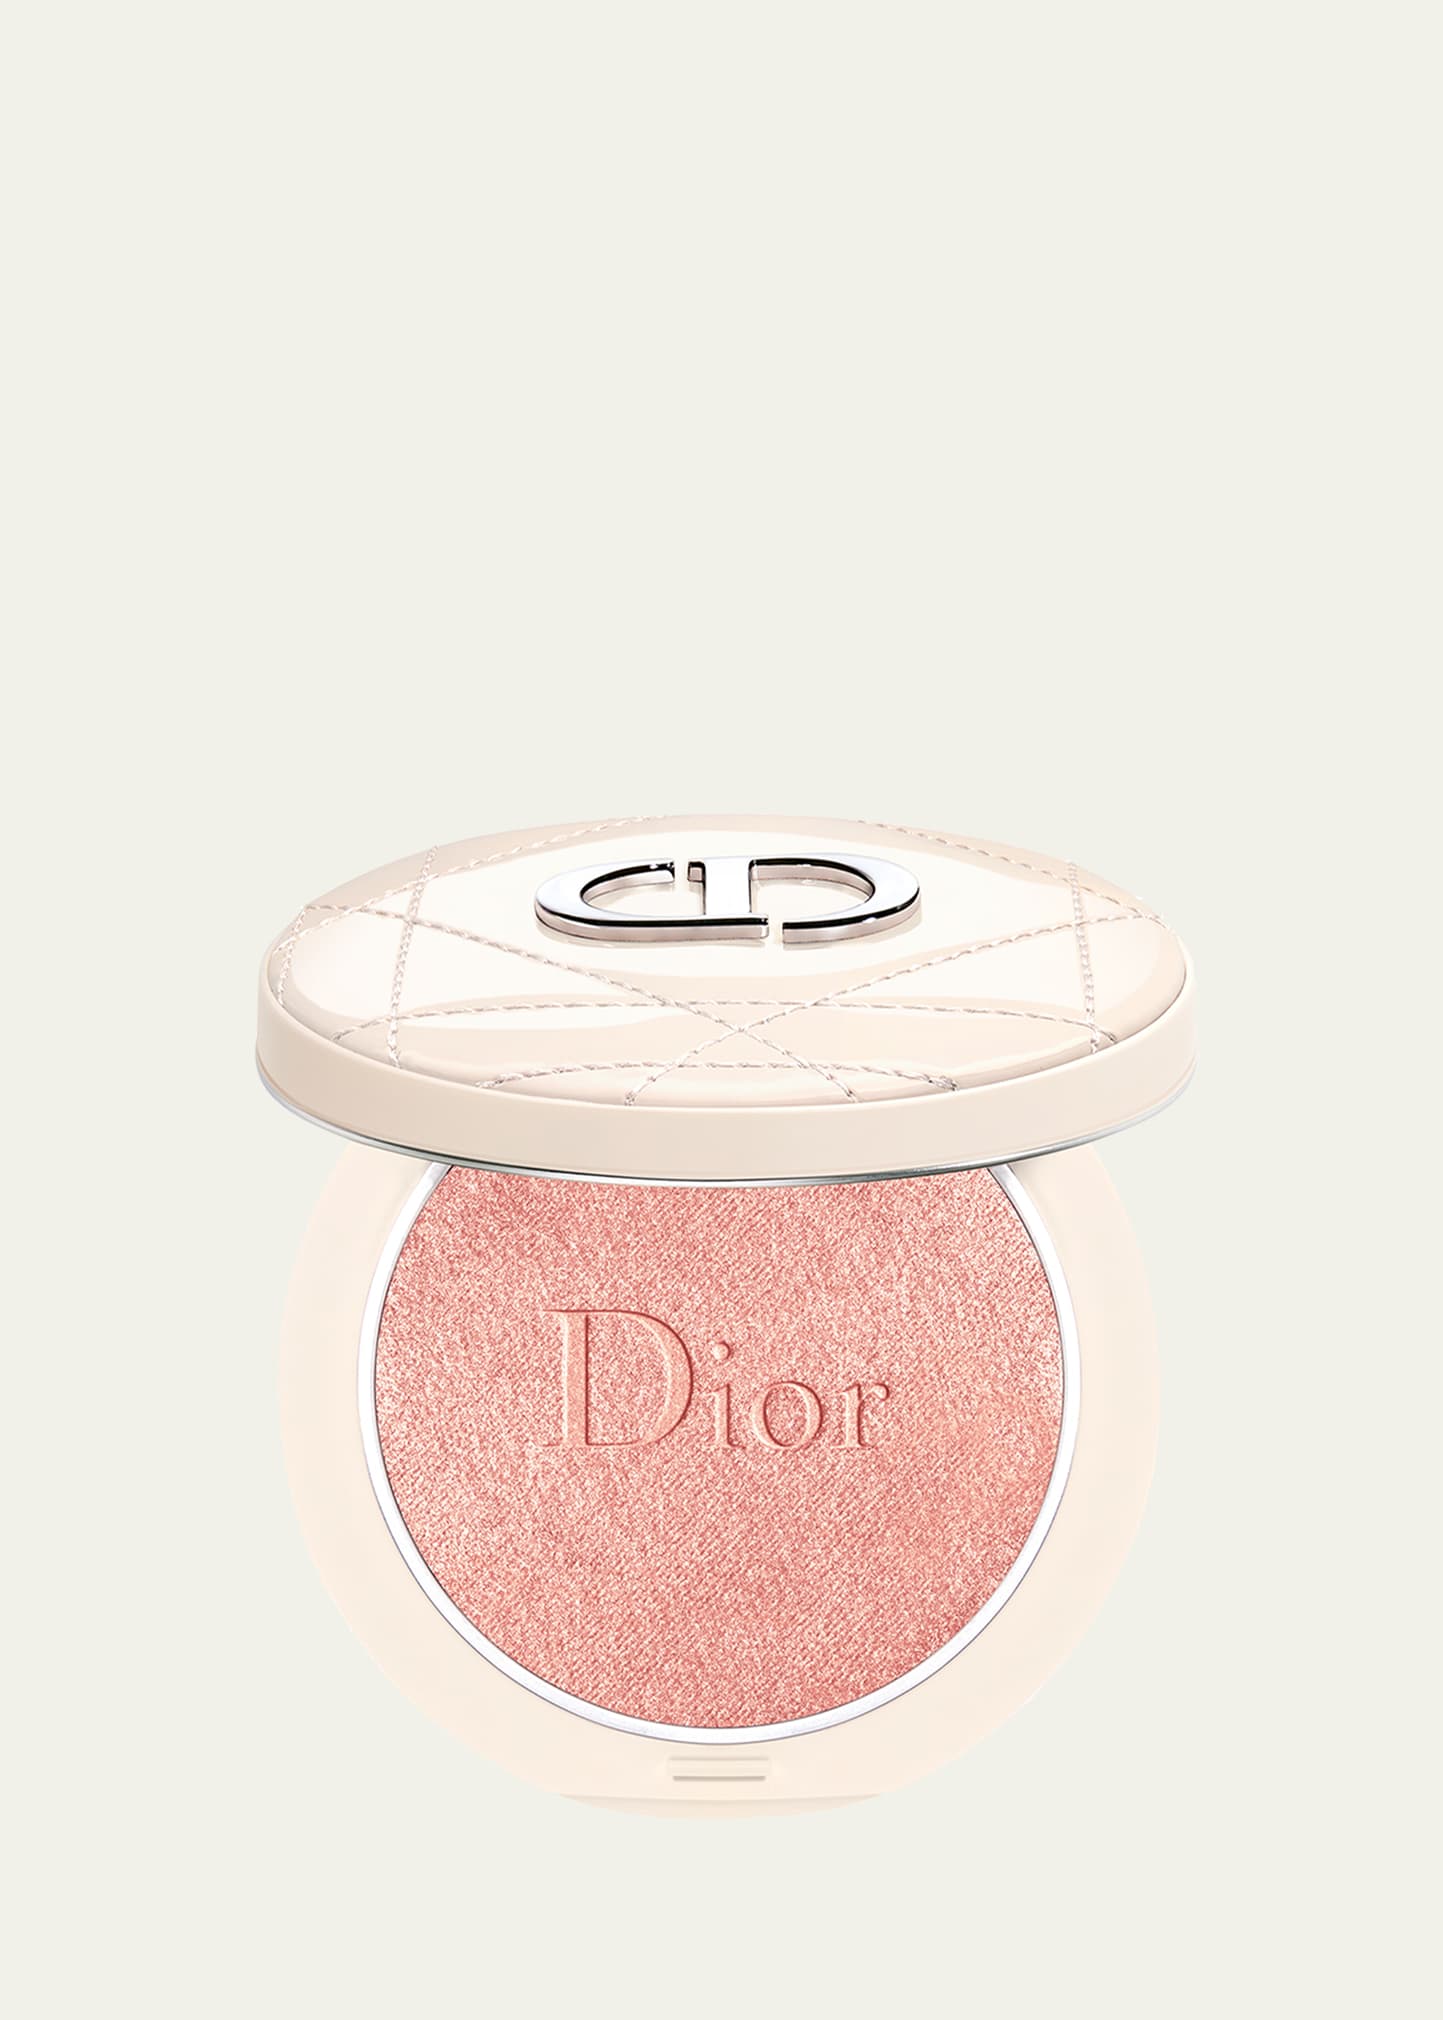 Dior Forever Couture Luminizer In 006 Coral Glow